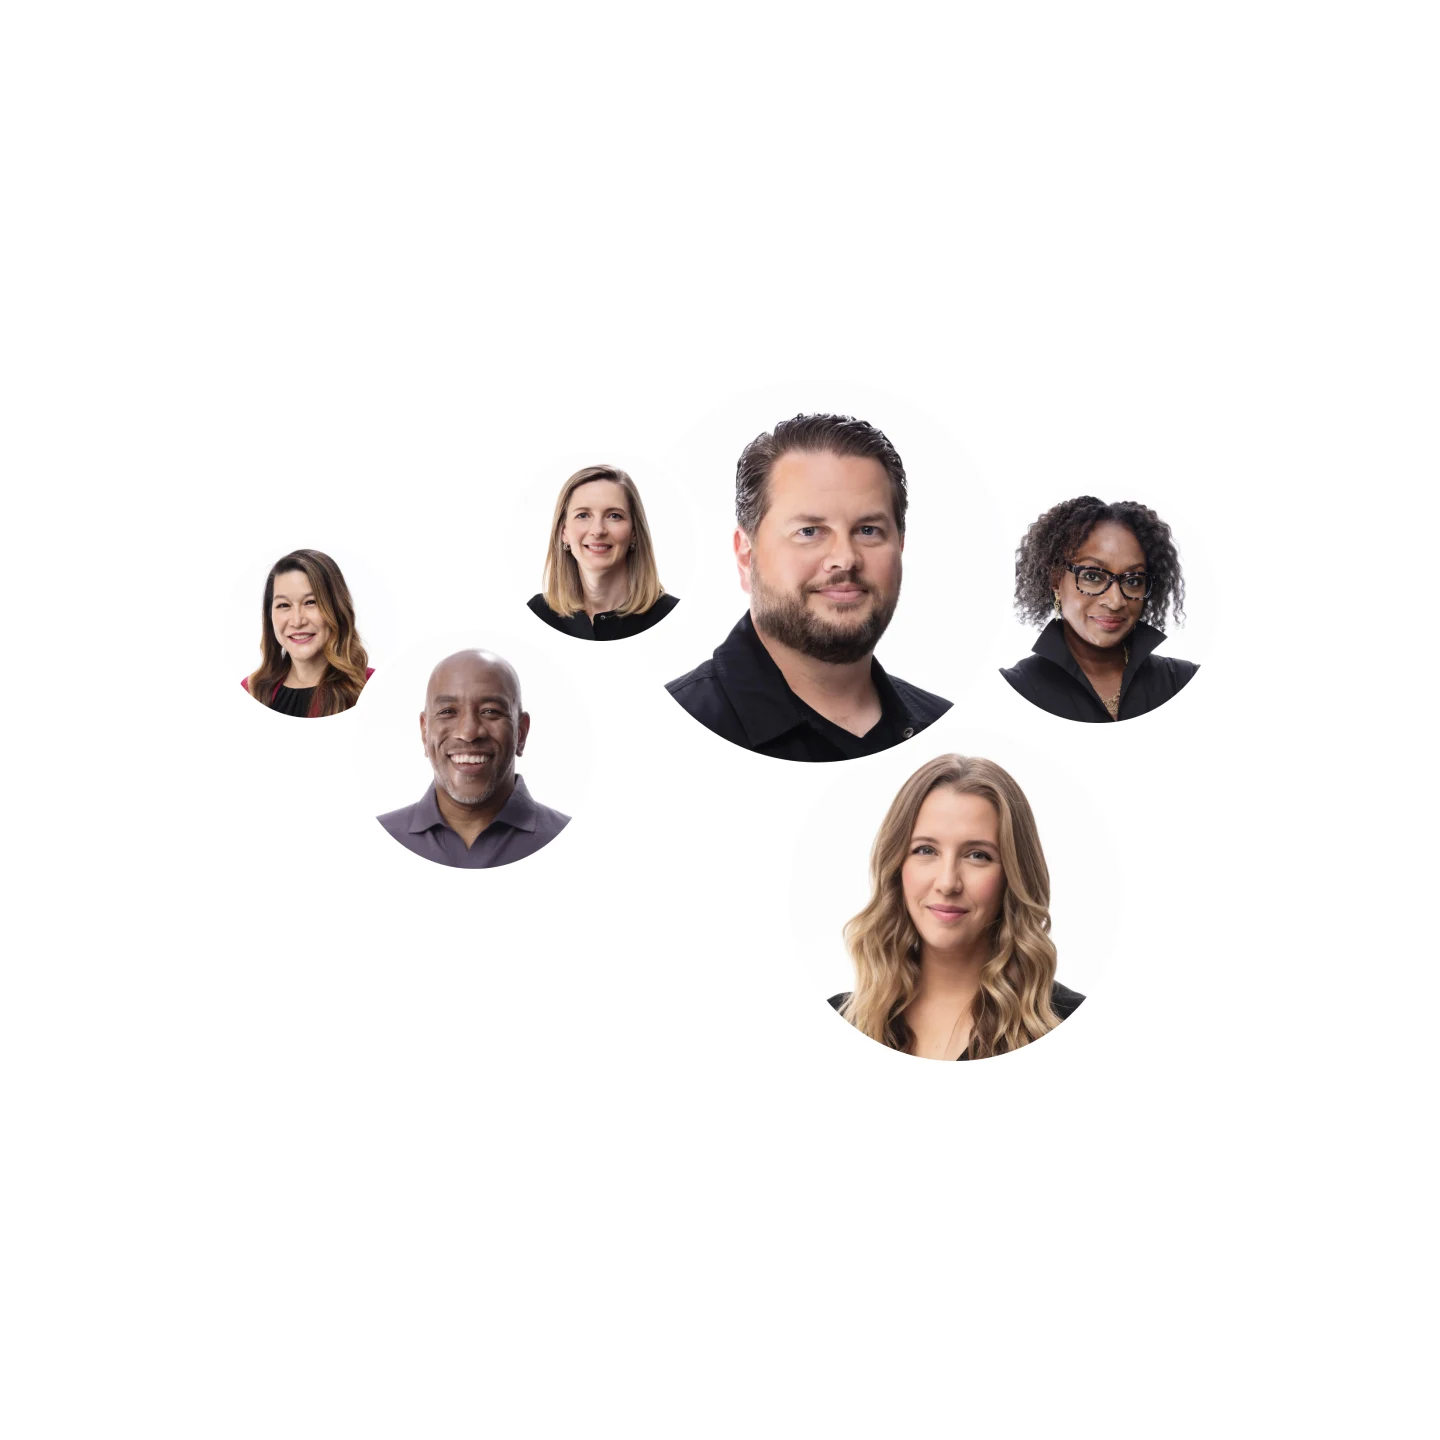 Headshots of Pinterest's executive team are arranged into bubbles on a white background.